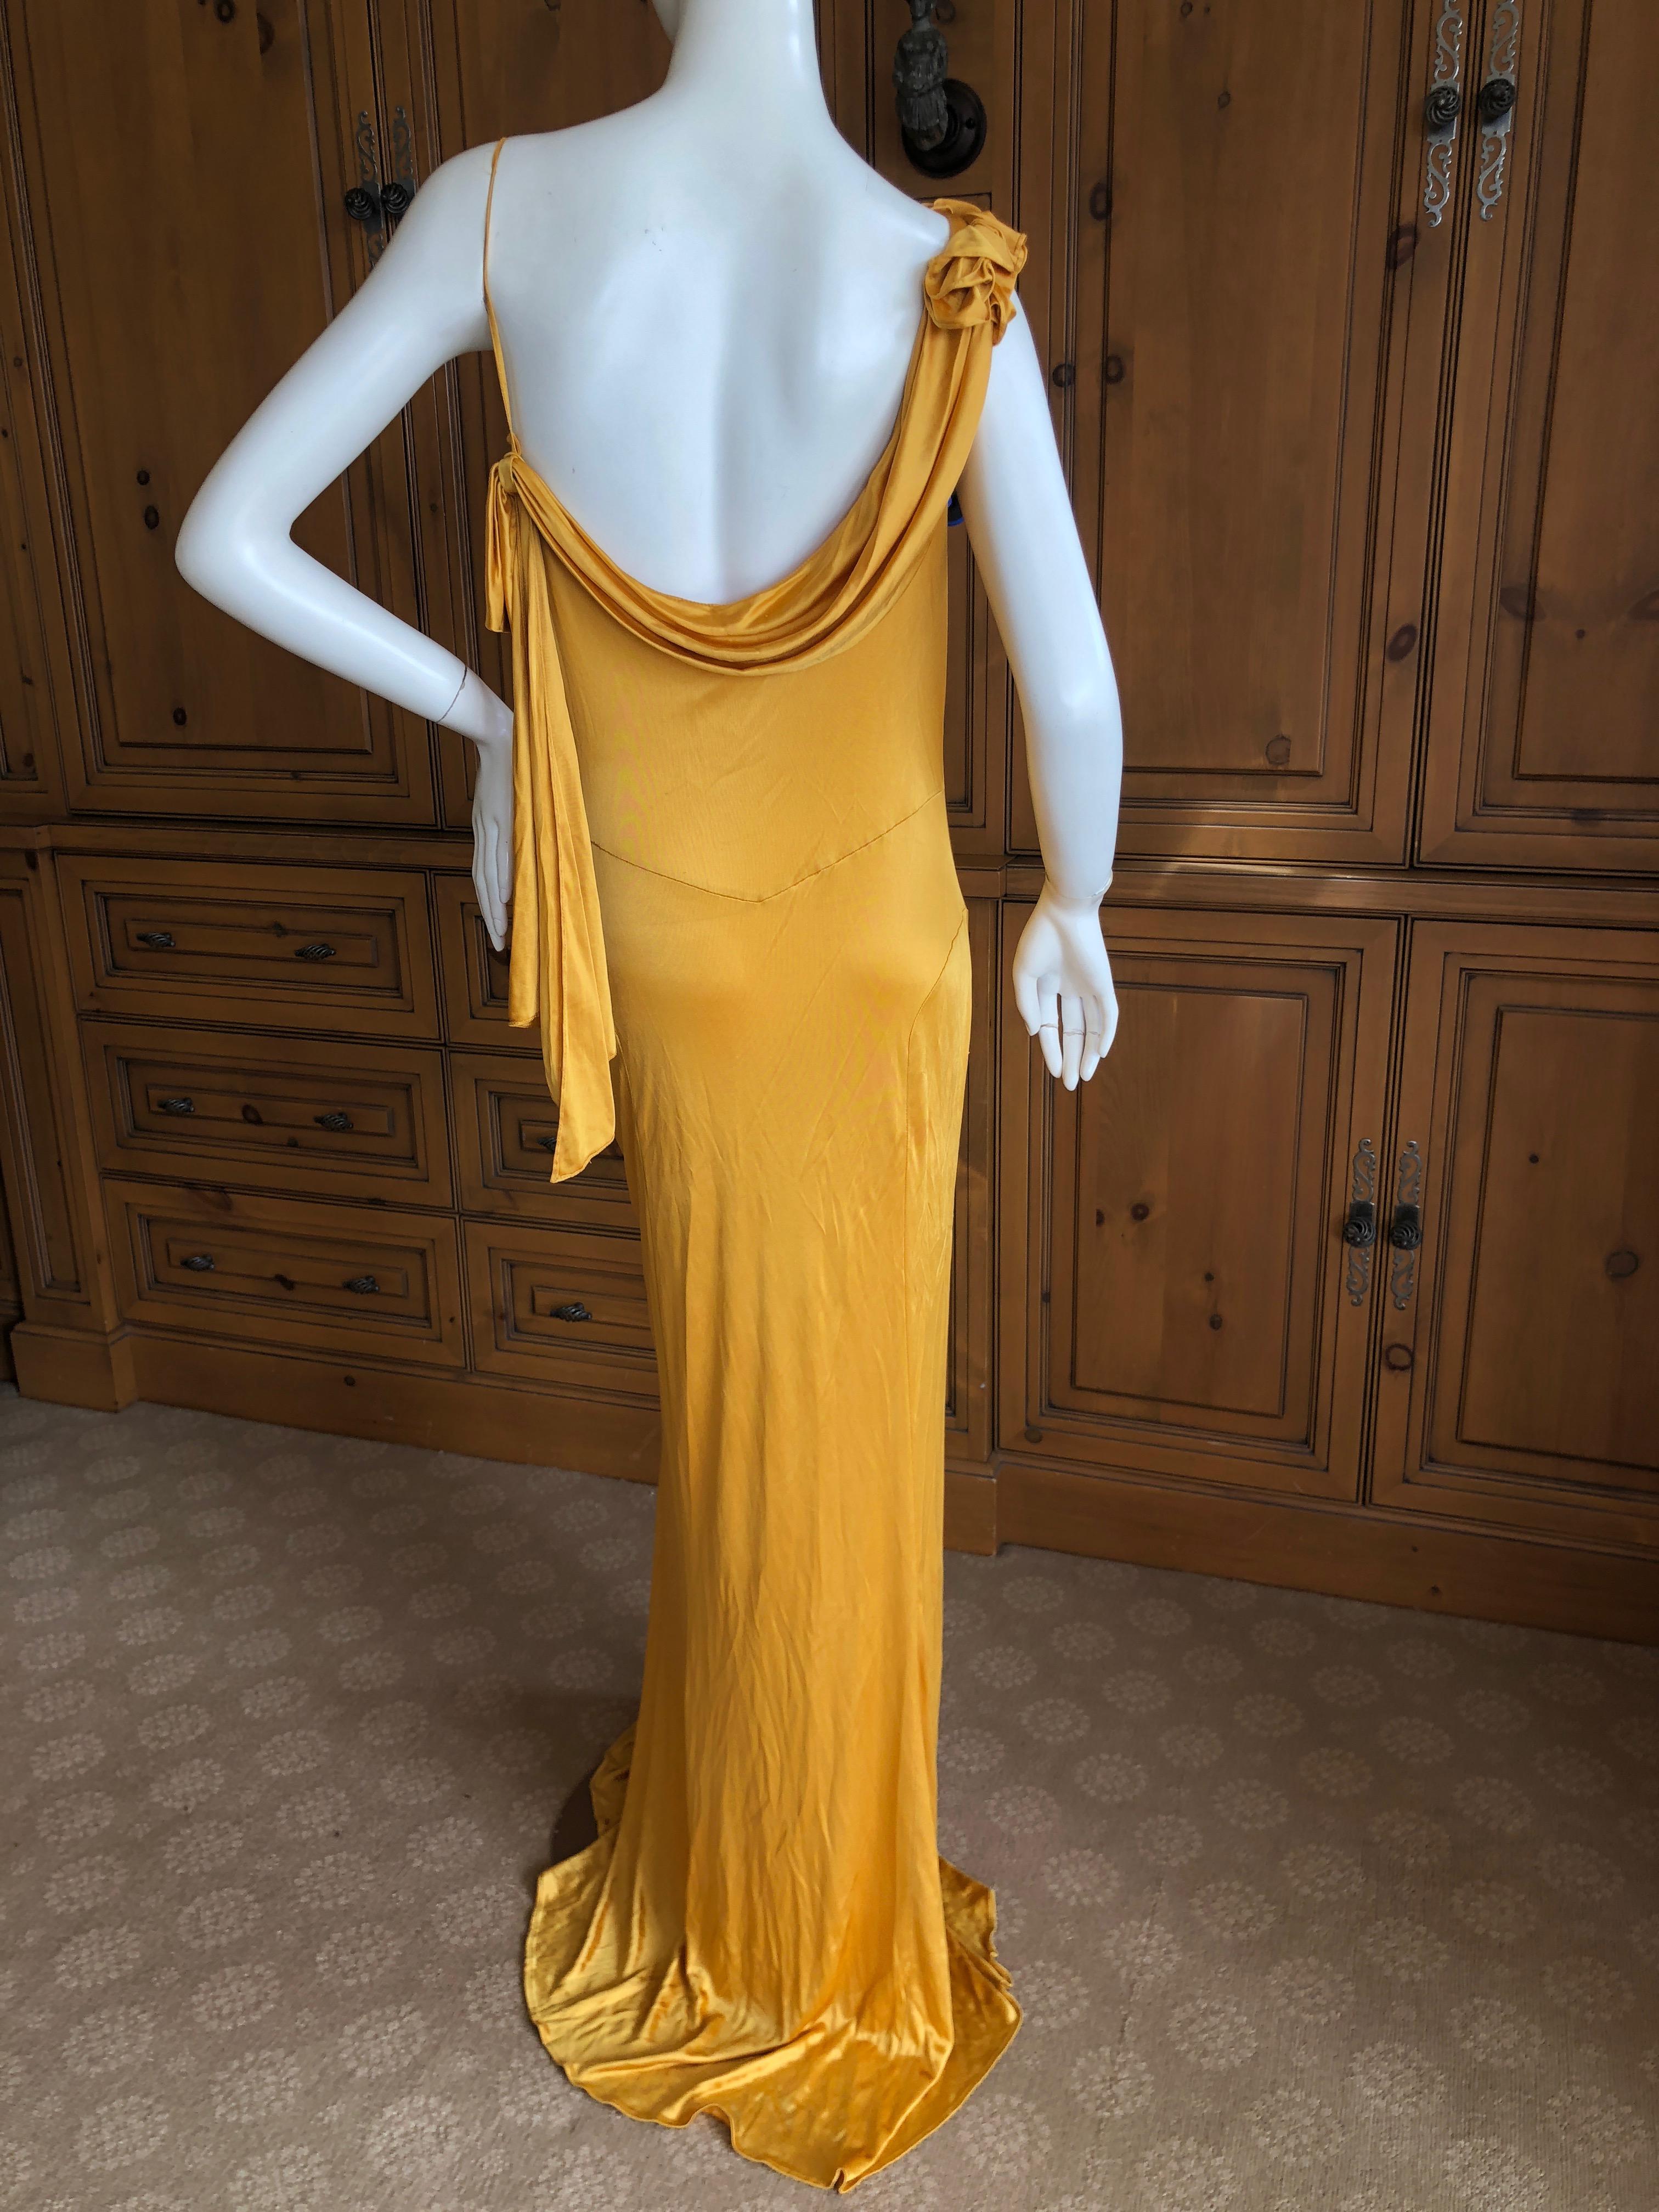 Exquisite John Galliano Spring 2000 Marigold Draped Bias Cut Evening Dress w Floral Trim
Spring Summer 2000.
Difficult to photograph, this is lovely.
Size 46
Bust 44'
Waist 32